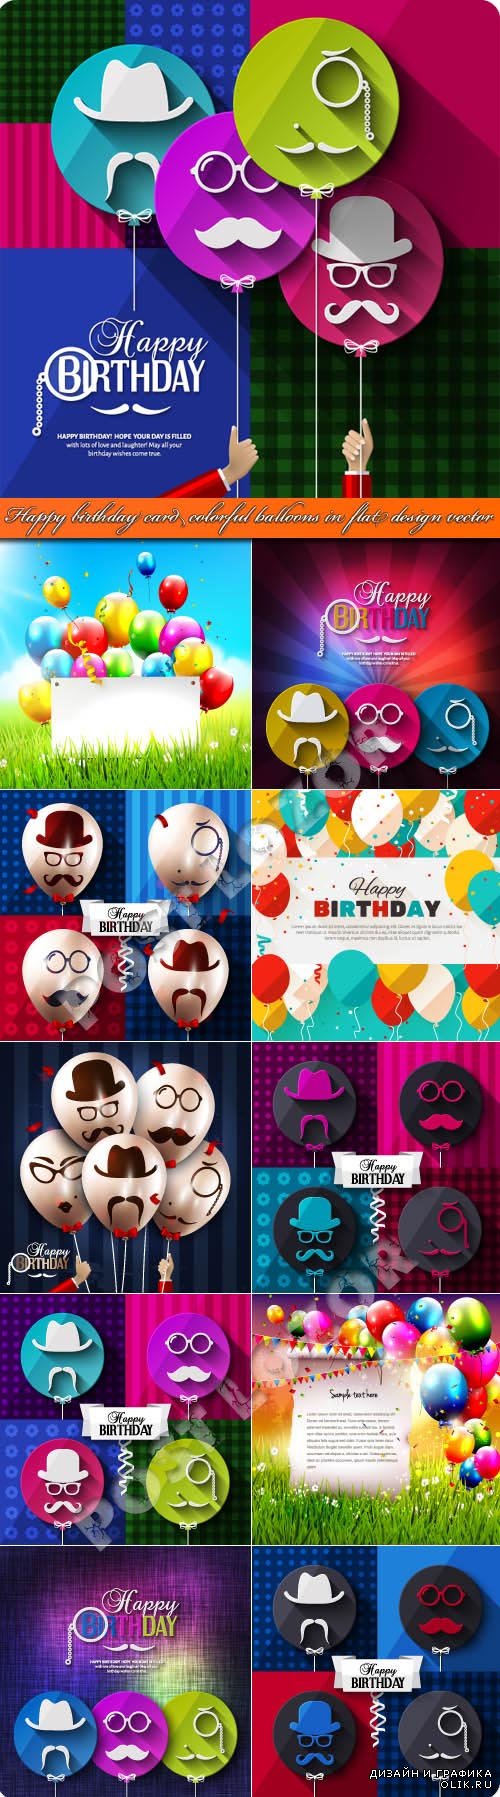 Happy birthday card colorful balloons in flat design vector